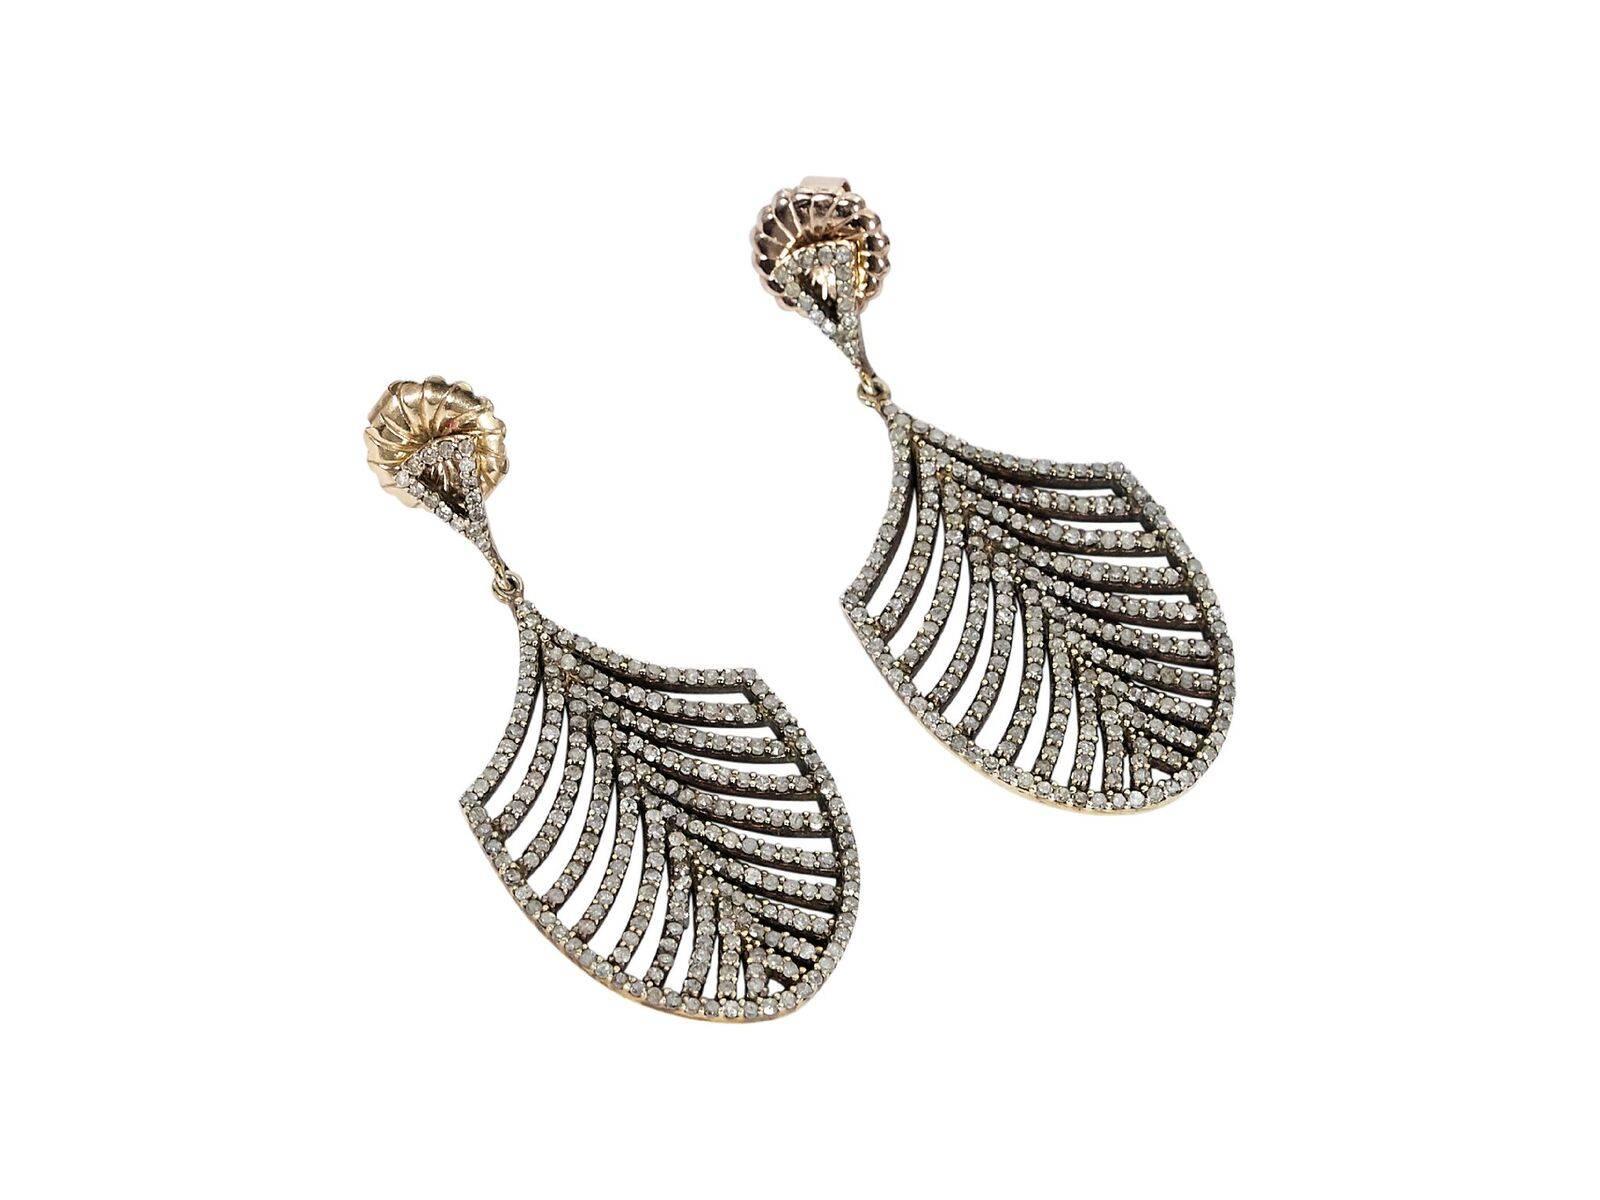 Product details:  Diamond-encrusted feather drop earrings by Jennifer Miller.  Post closure.  Goldtone hardware.  1.25